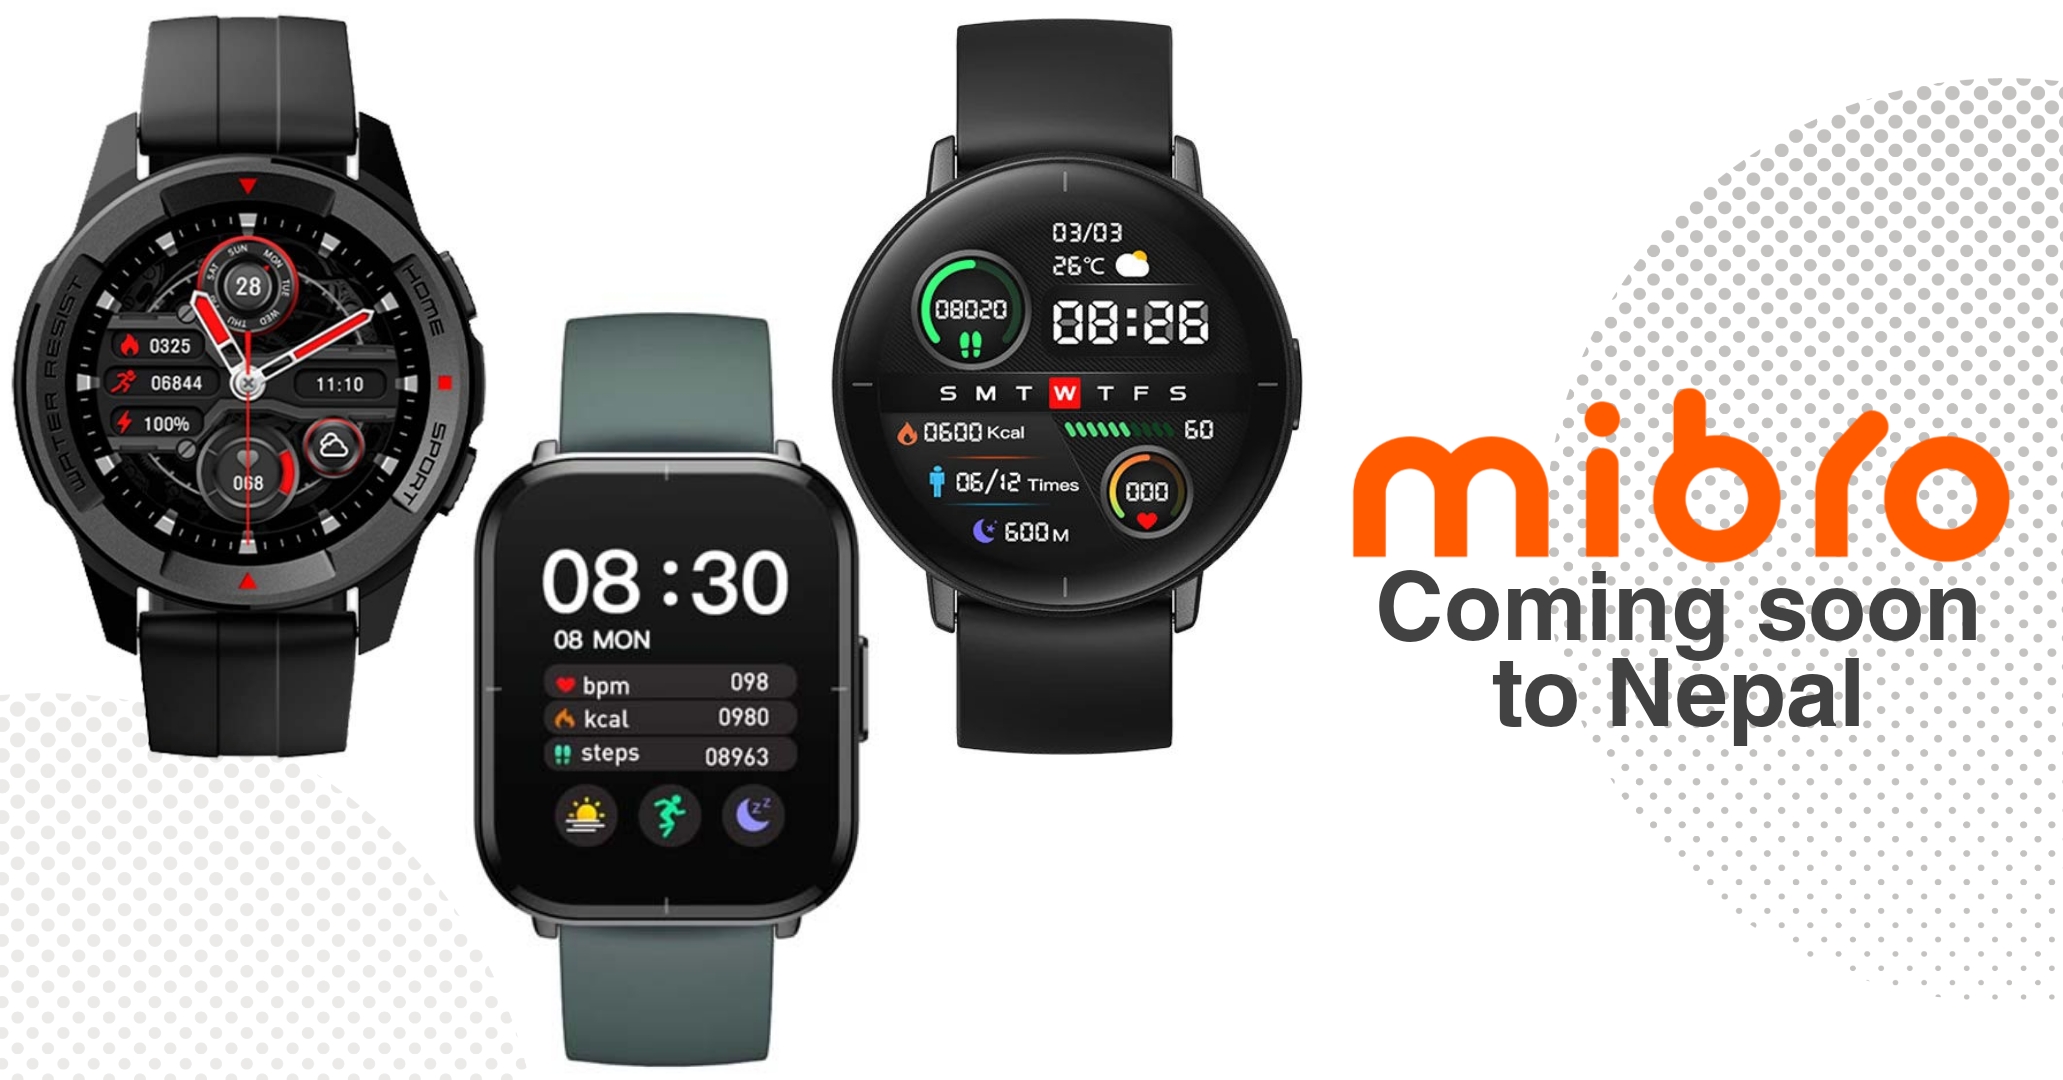 Xiaomi Mibro Smartwatch Specs, Availability, Features, Price in Nepal